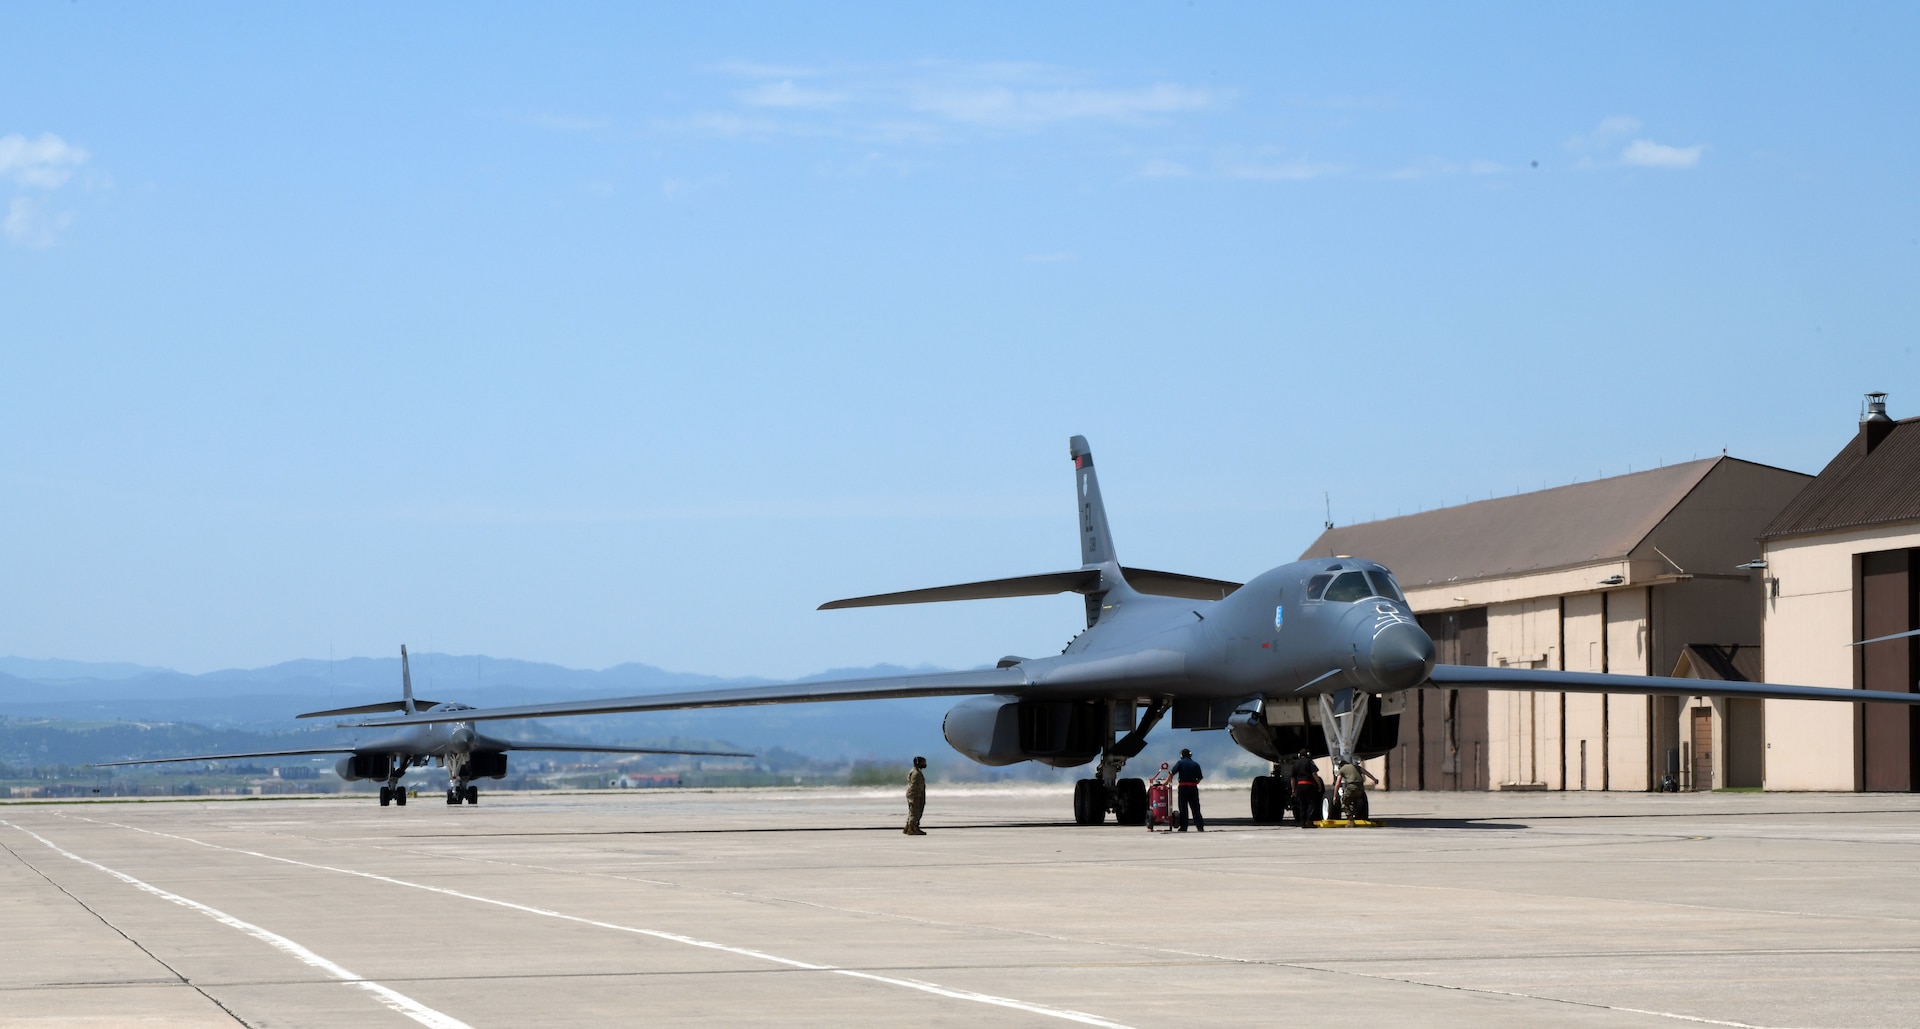 Two B-1B Lancers assigned to the 34th Bomb Squadron taxi in to the apron on the flight line at Ellsworth Air Force Base, S.D., May 20, 2020.  The two bombers completed a long-range, long-duration Bomber Task Force mission within the U.S. European Command area of responsibility. BTF missions are representative of the U.S. commitment to integrate with NATO and allied partners to ensure regional security. (U.S. Air Force photo by Airman 1st Class Christina Bennett)